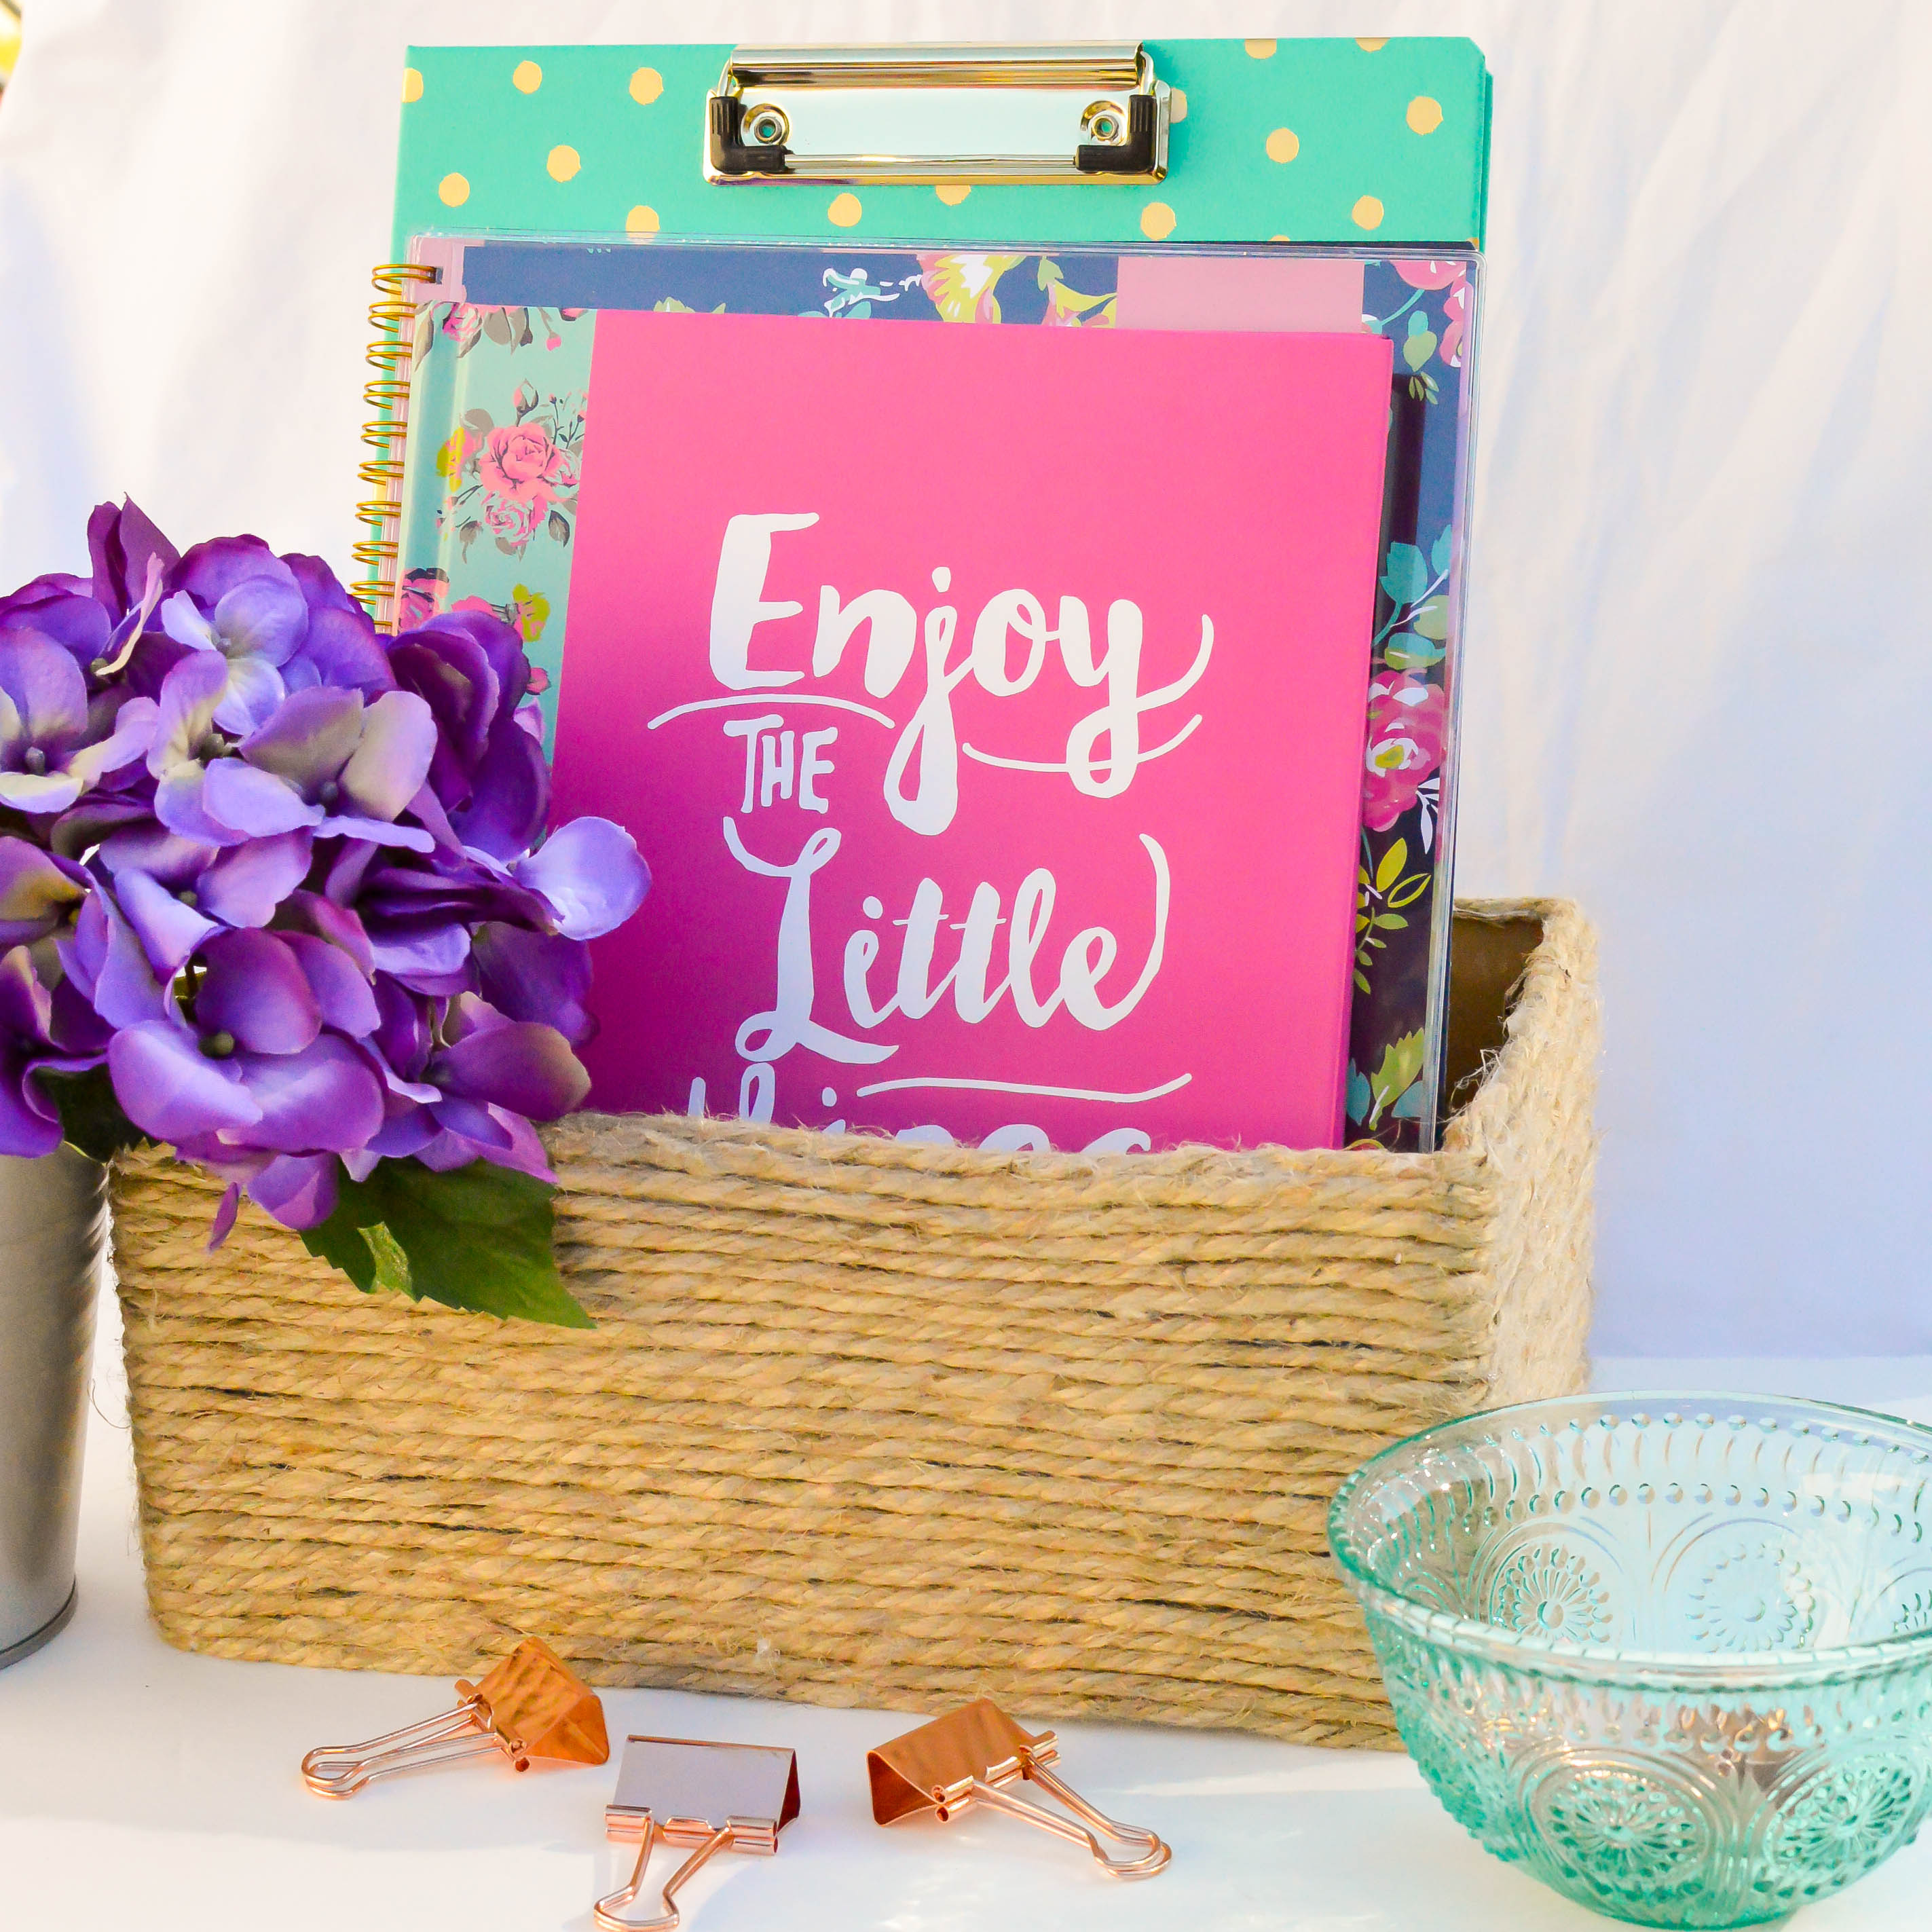 DIY Woven Basket {easy, cute & affordable!} - The Simply Organized Home